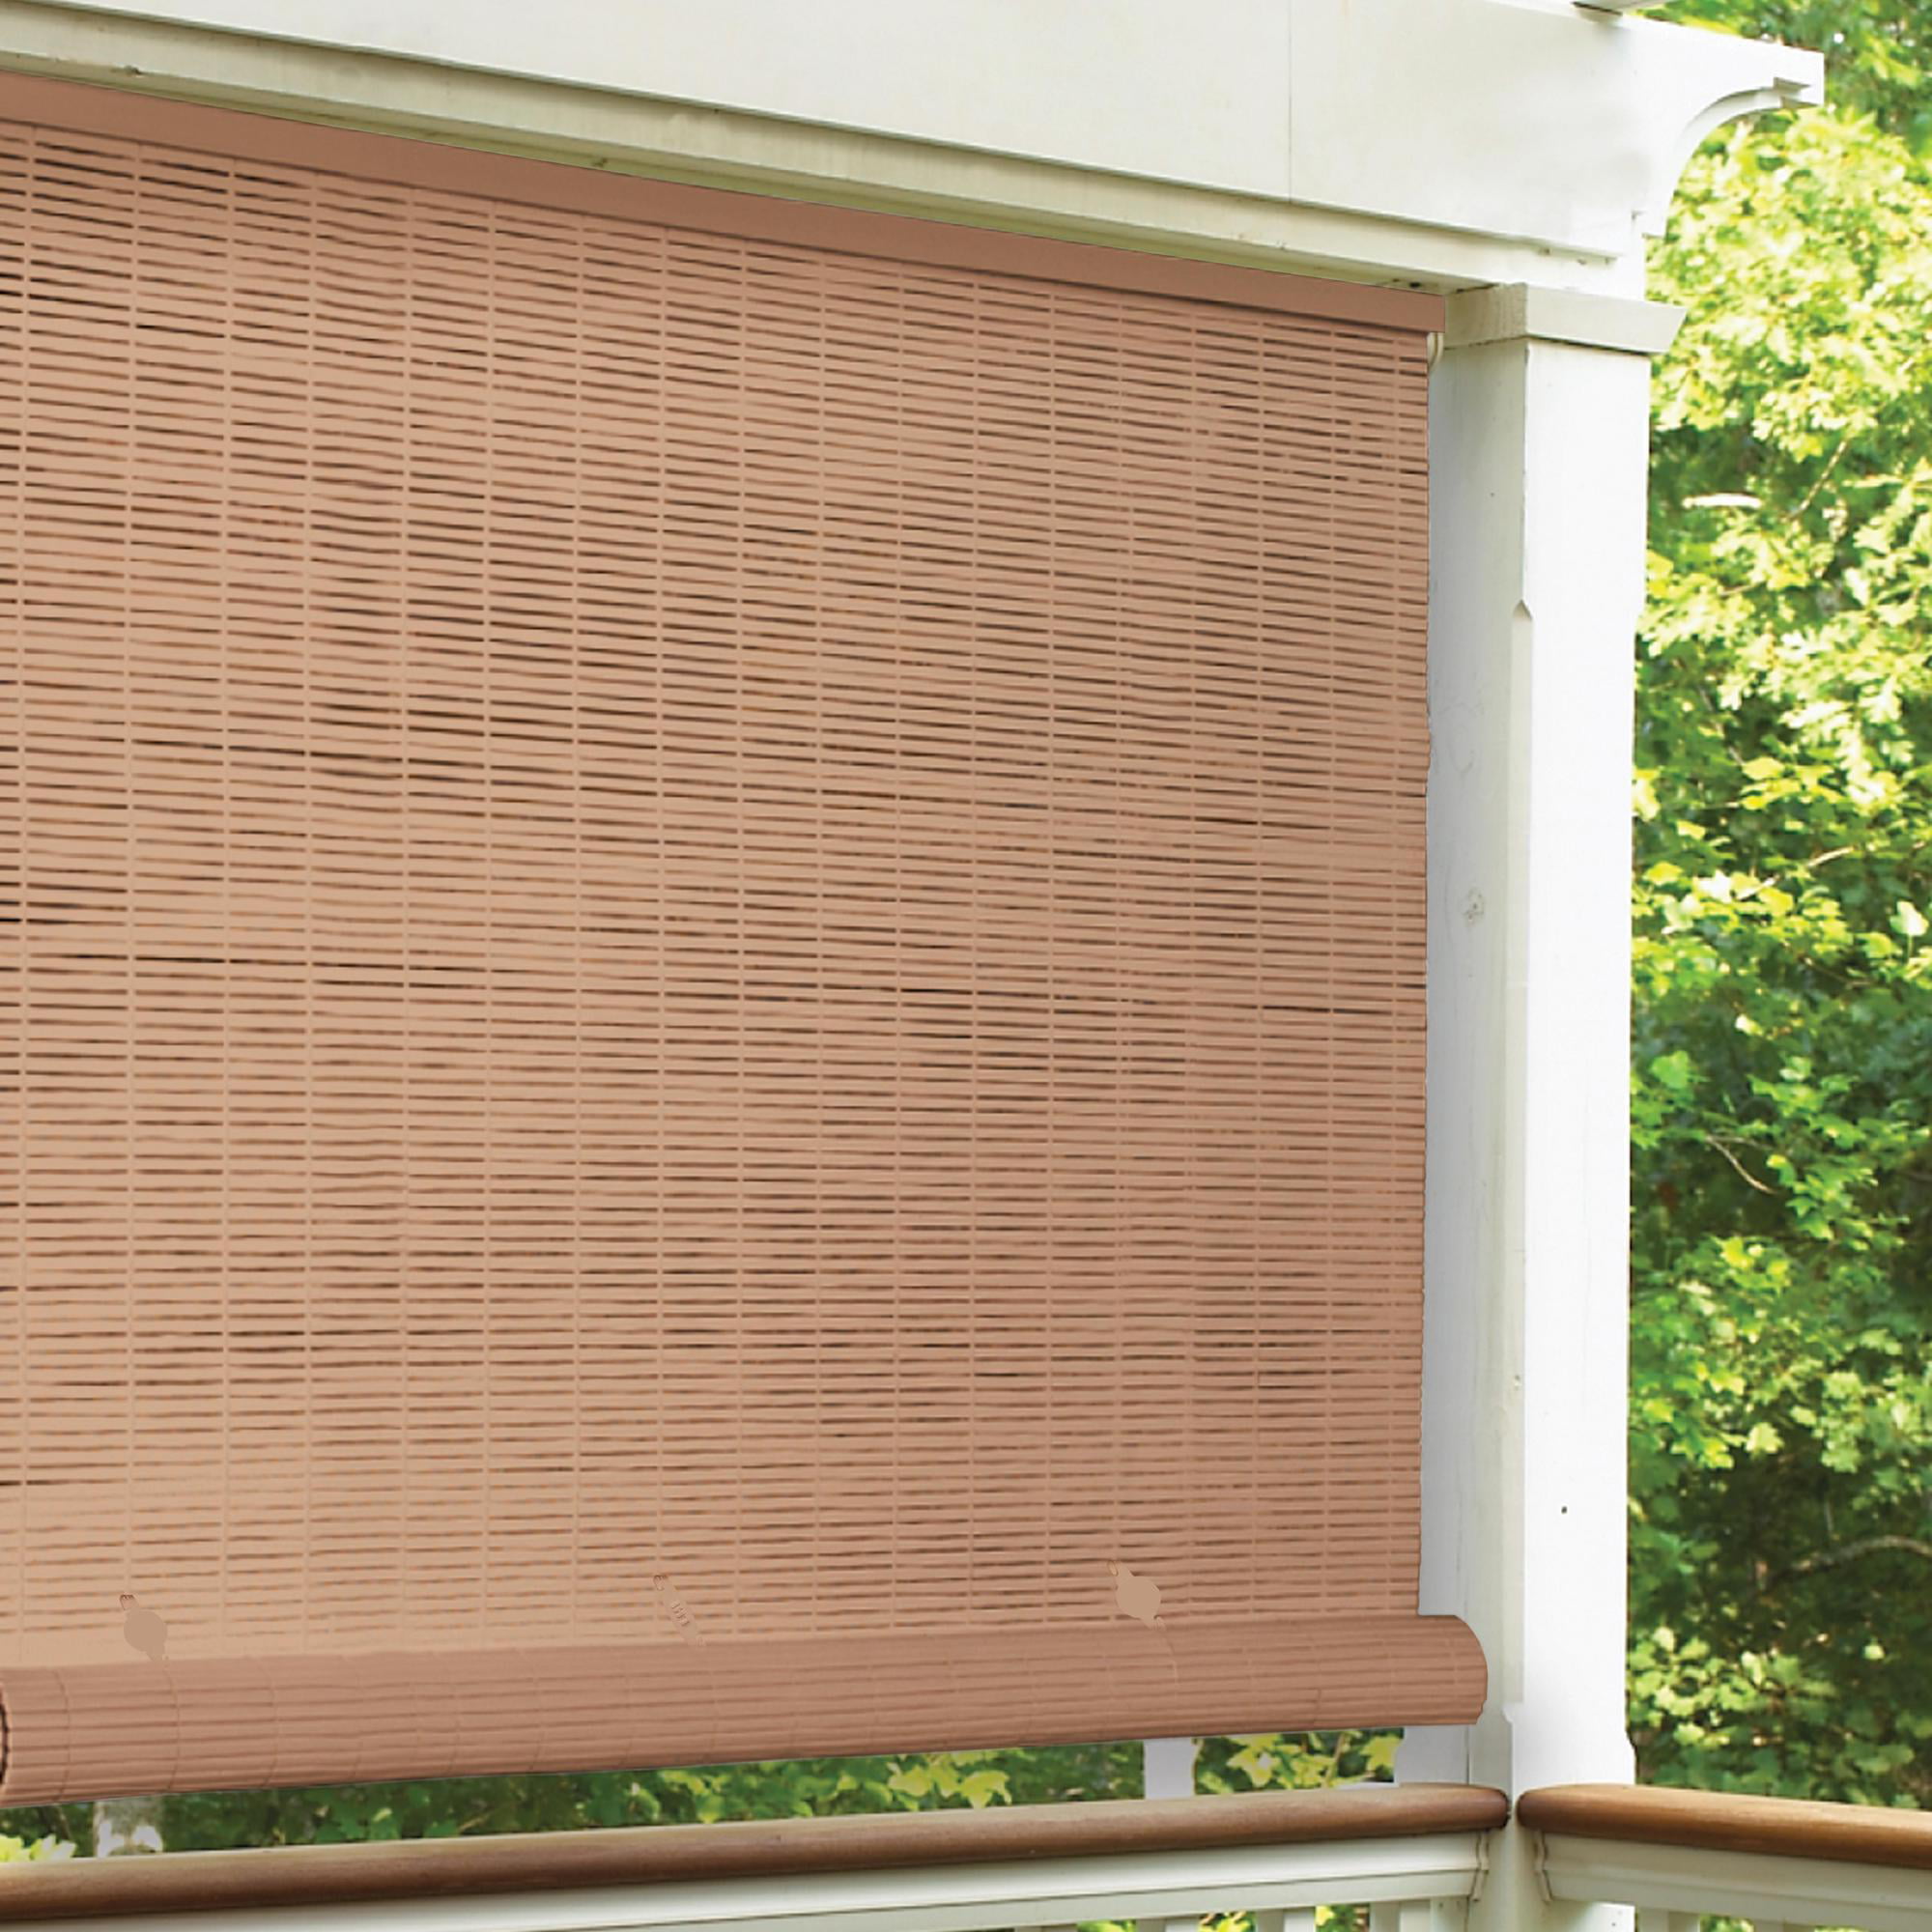 8 Ft Window Sun Shade Blind Roller Roll Up Exterior Cordless Patio Outdoor Porch